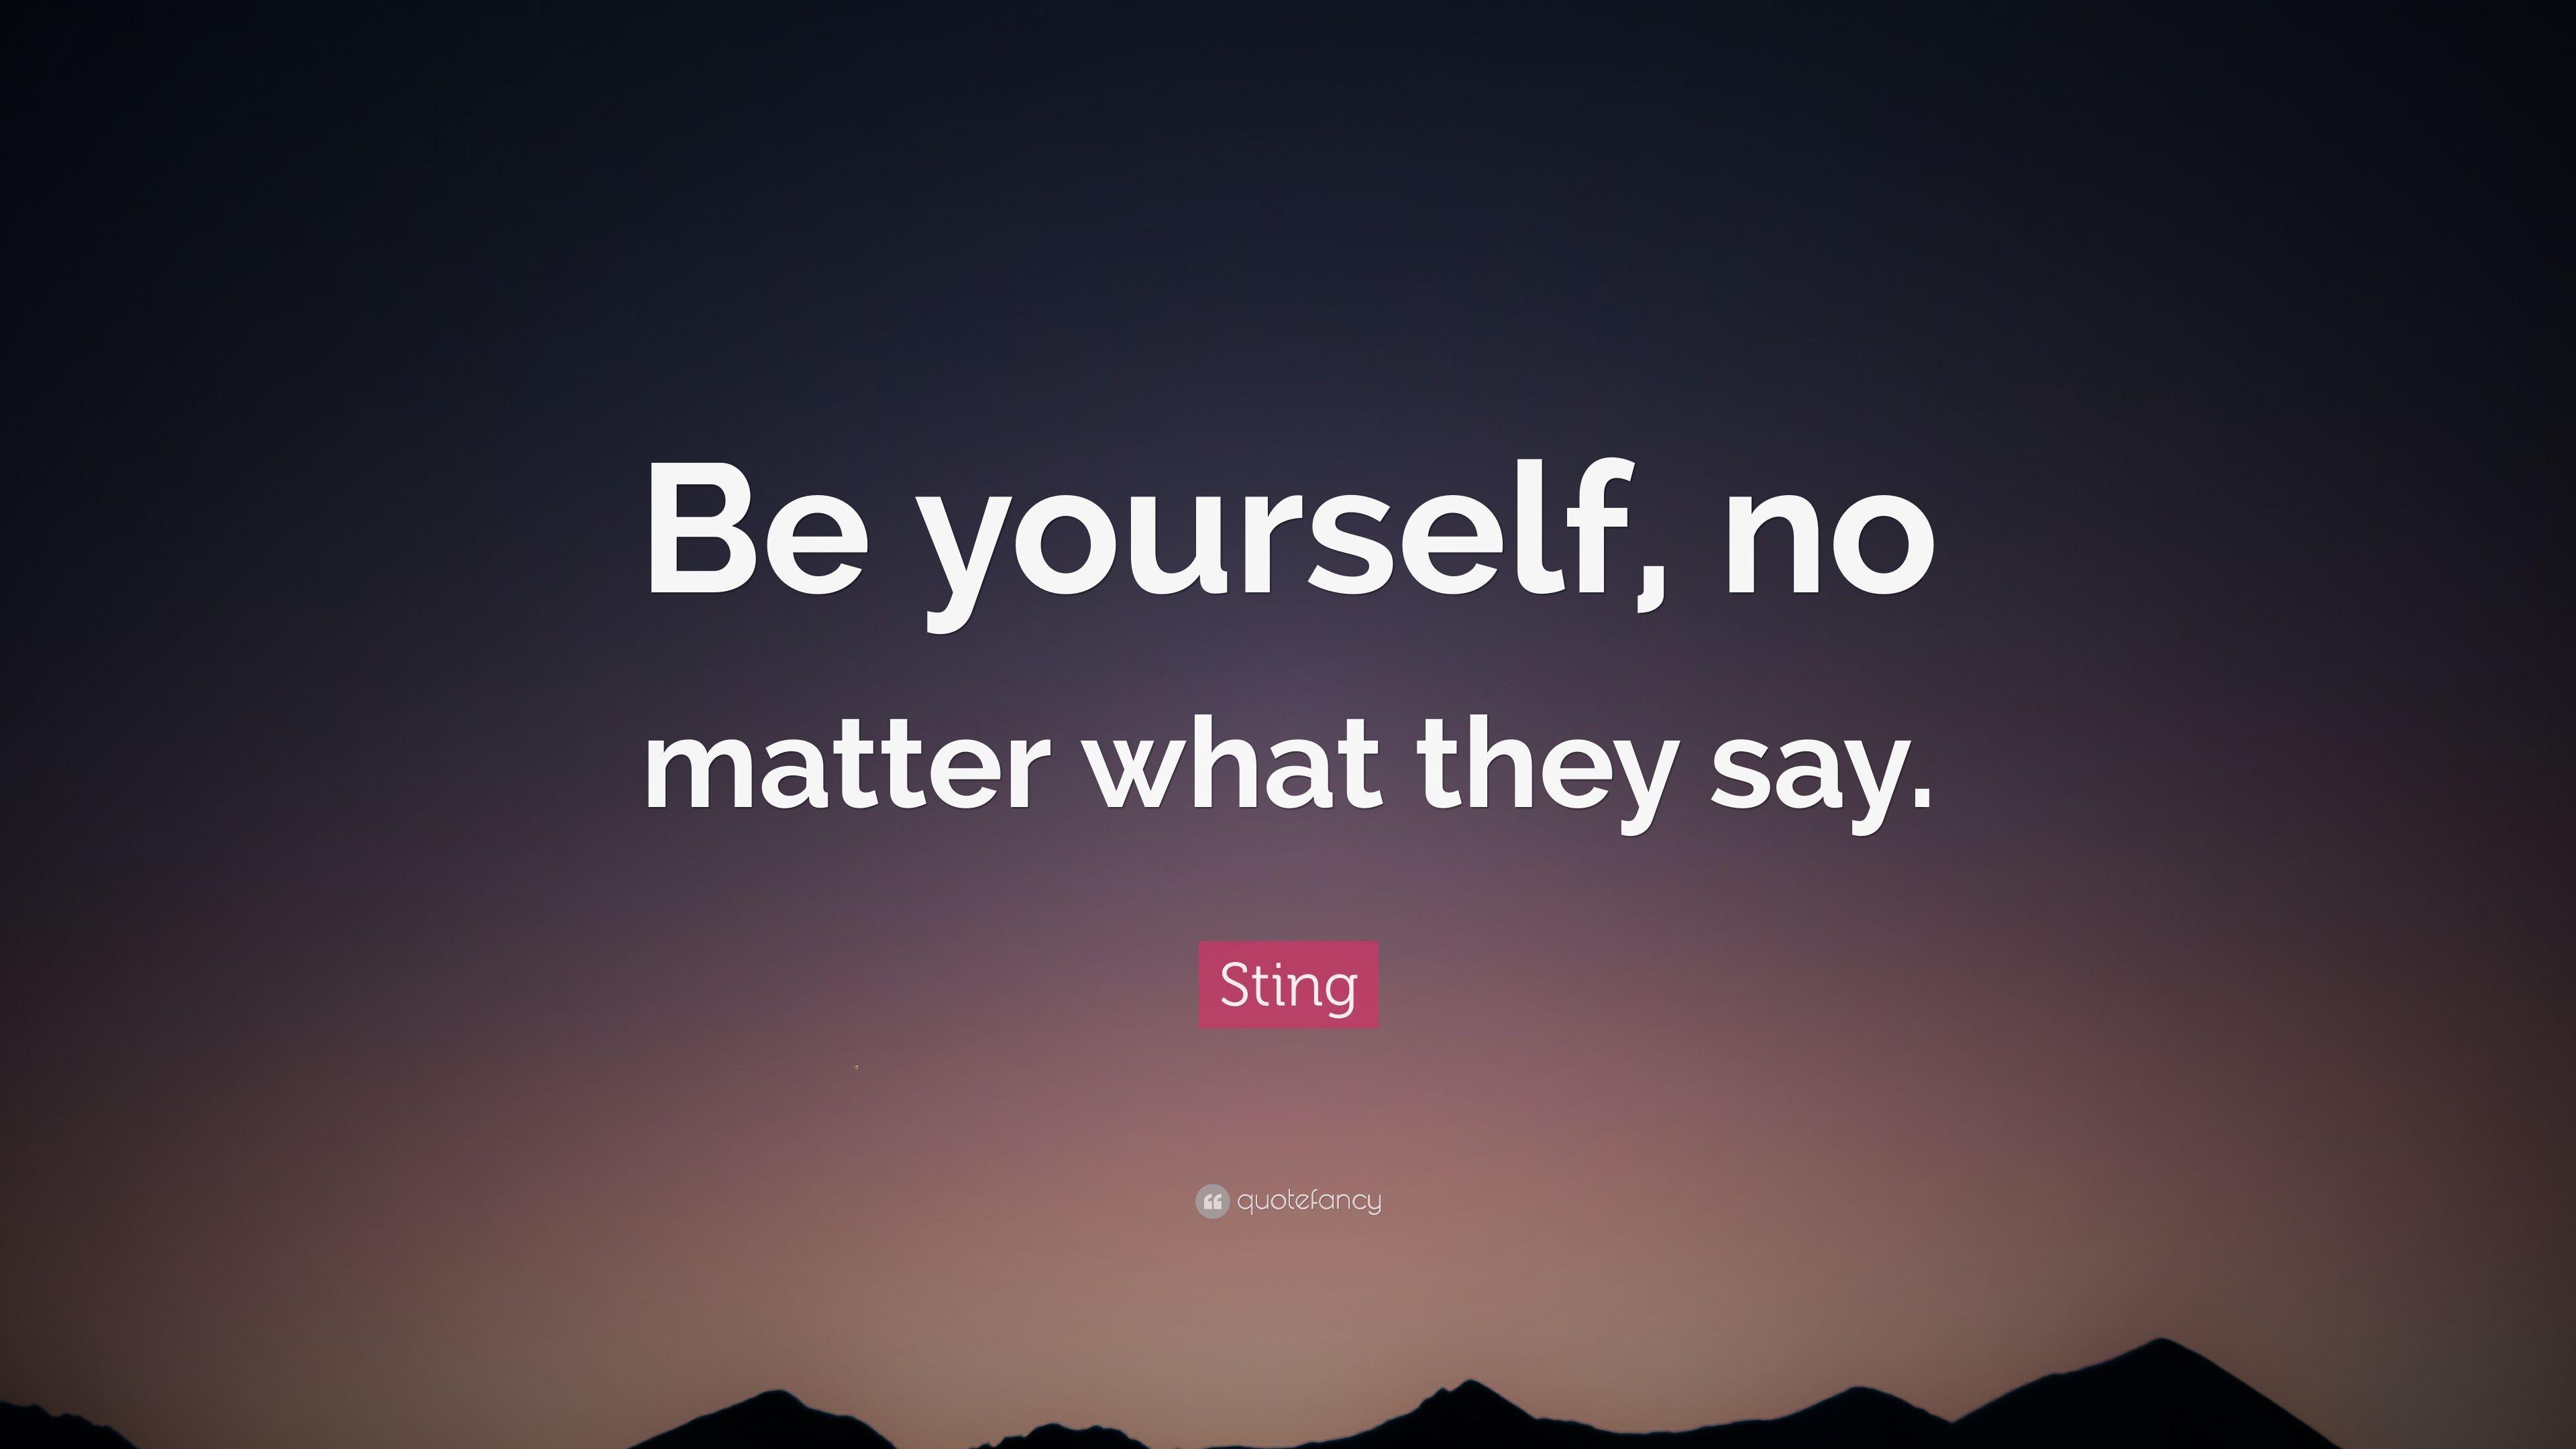 Sting Quote: “Be yourself, no matter what they say.” 10